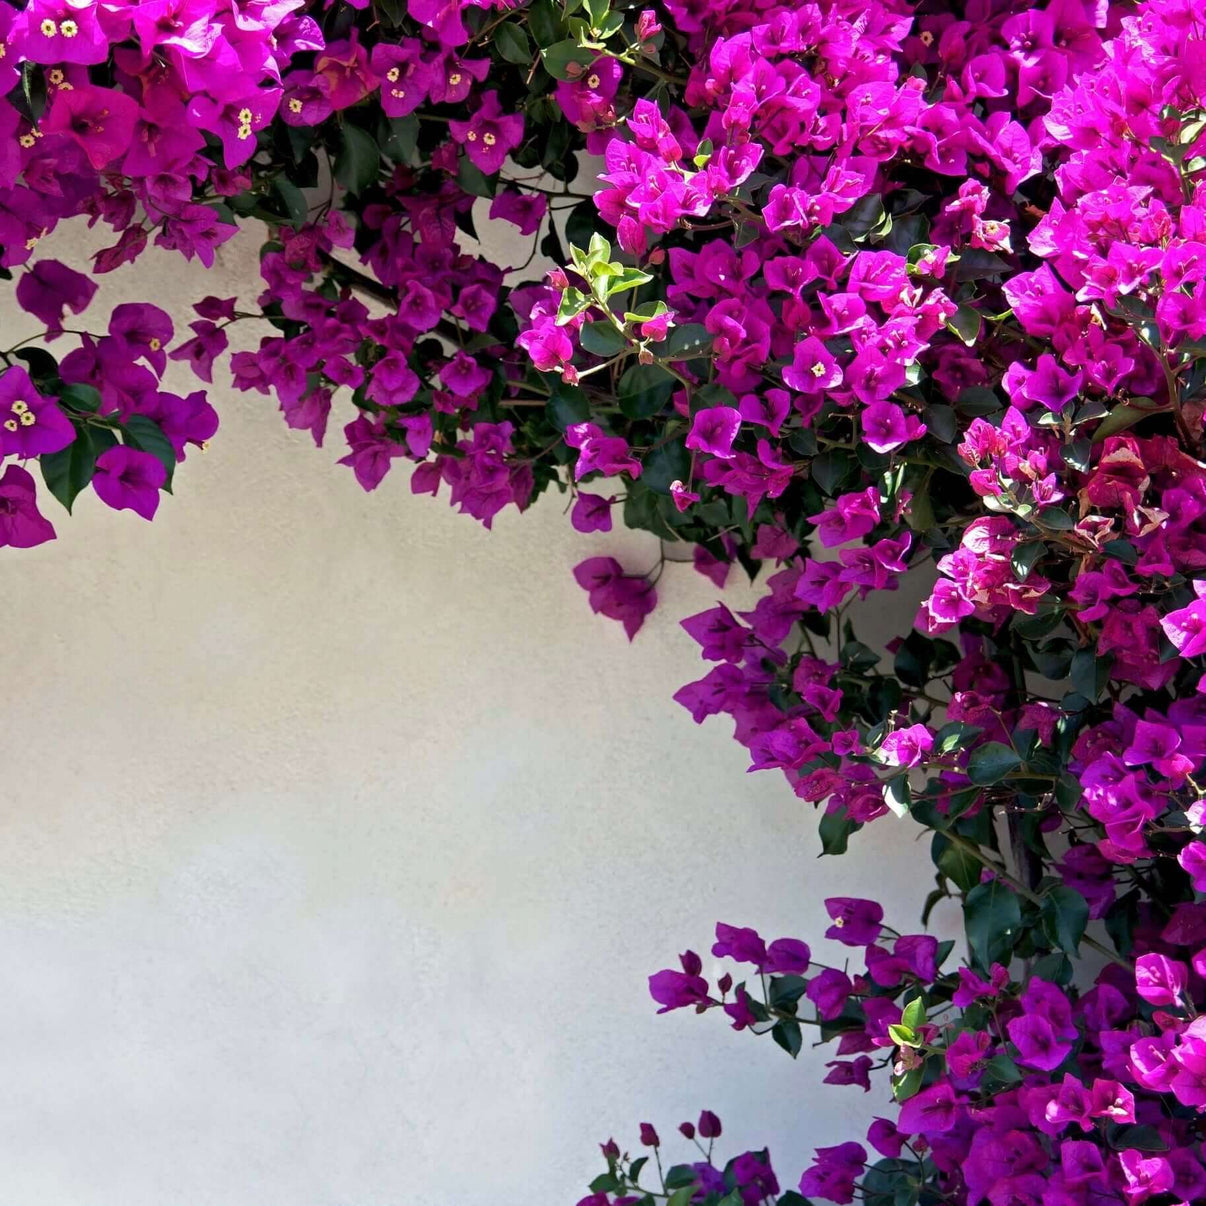 Purple Bougainvillea: A vibrant purple flower with delicate petals and green leaves, adding beauty to any garden or landscape